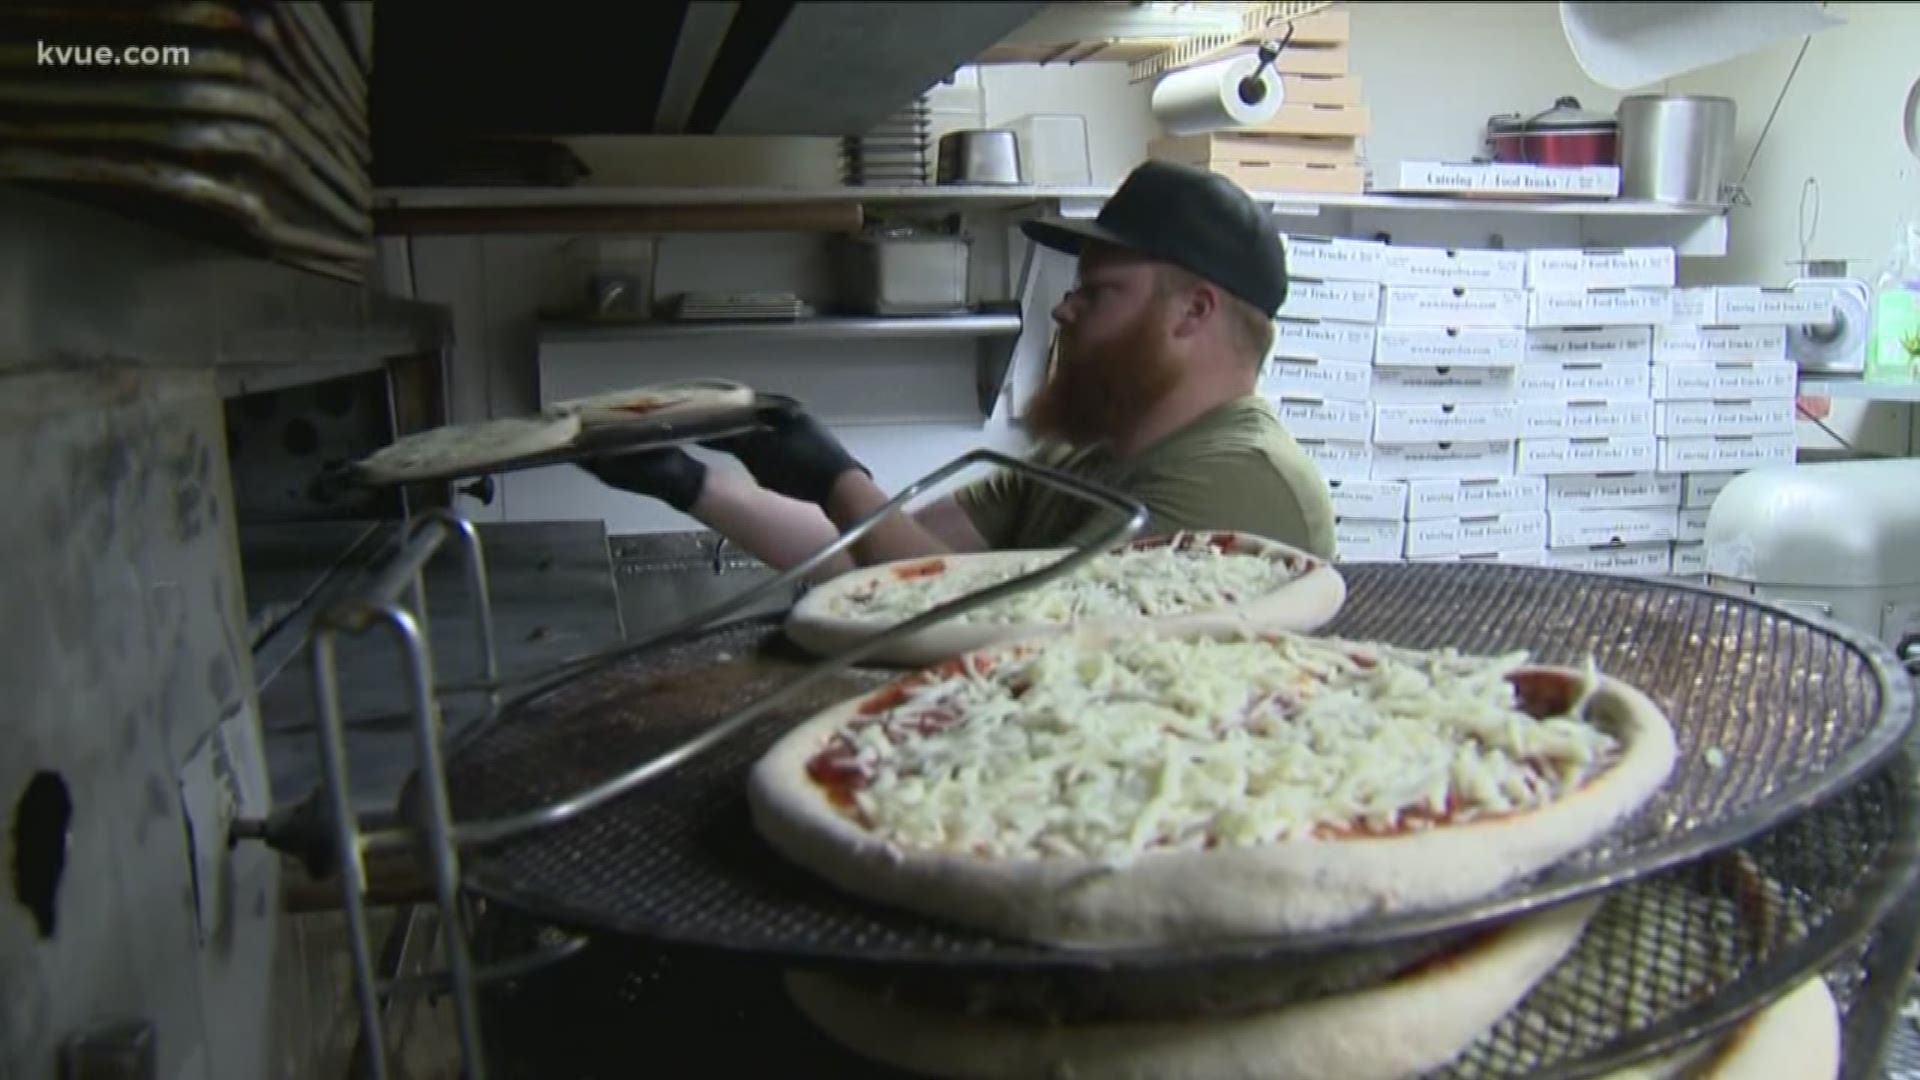 Roppolo's Pizzeria has been making more than 100 pizzas a day for heroes within our own community.